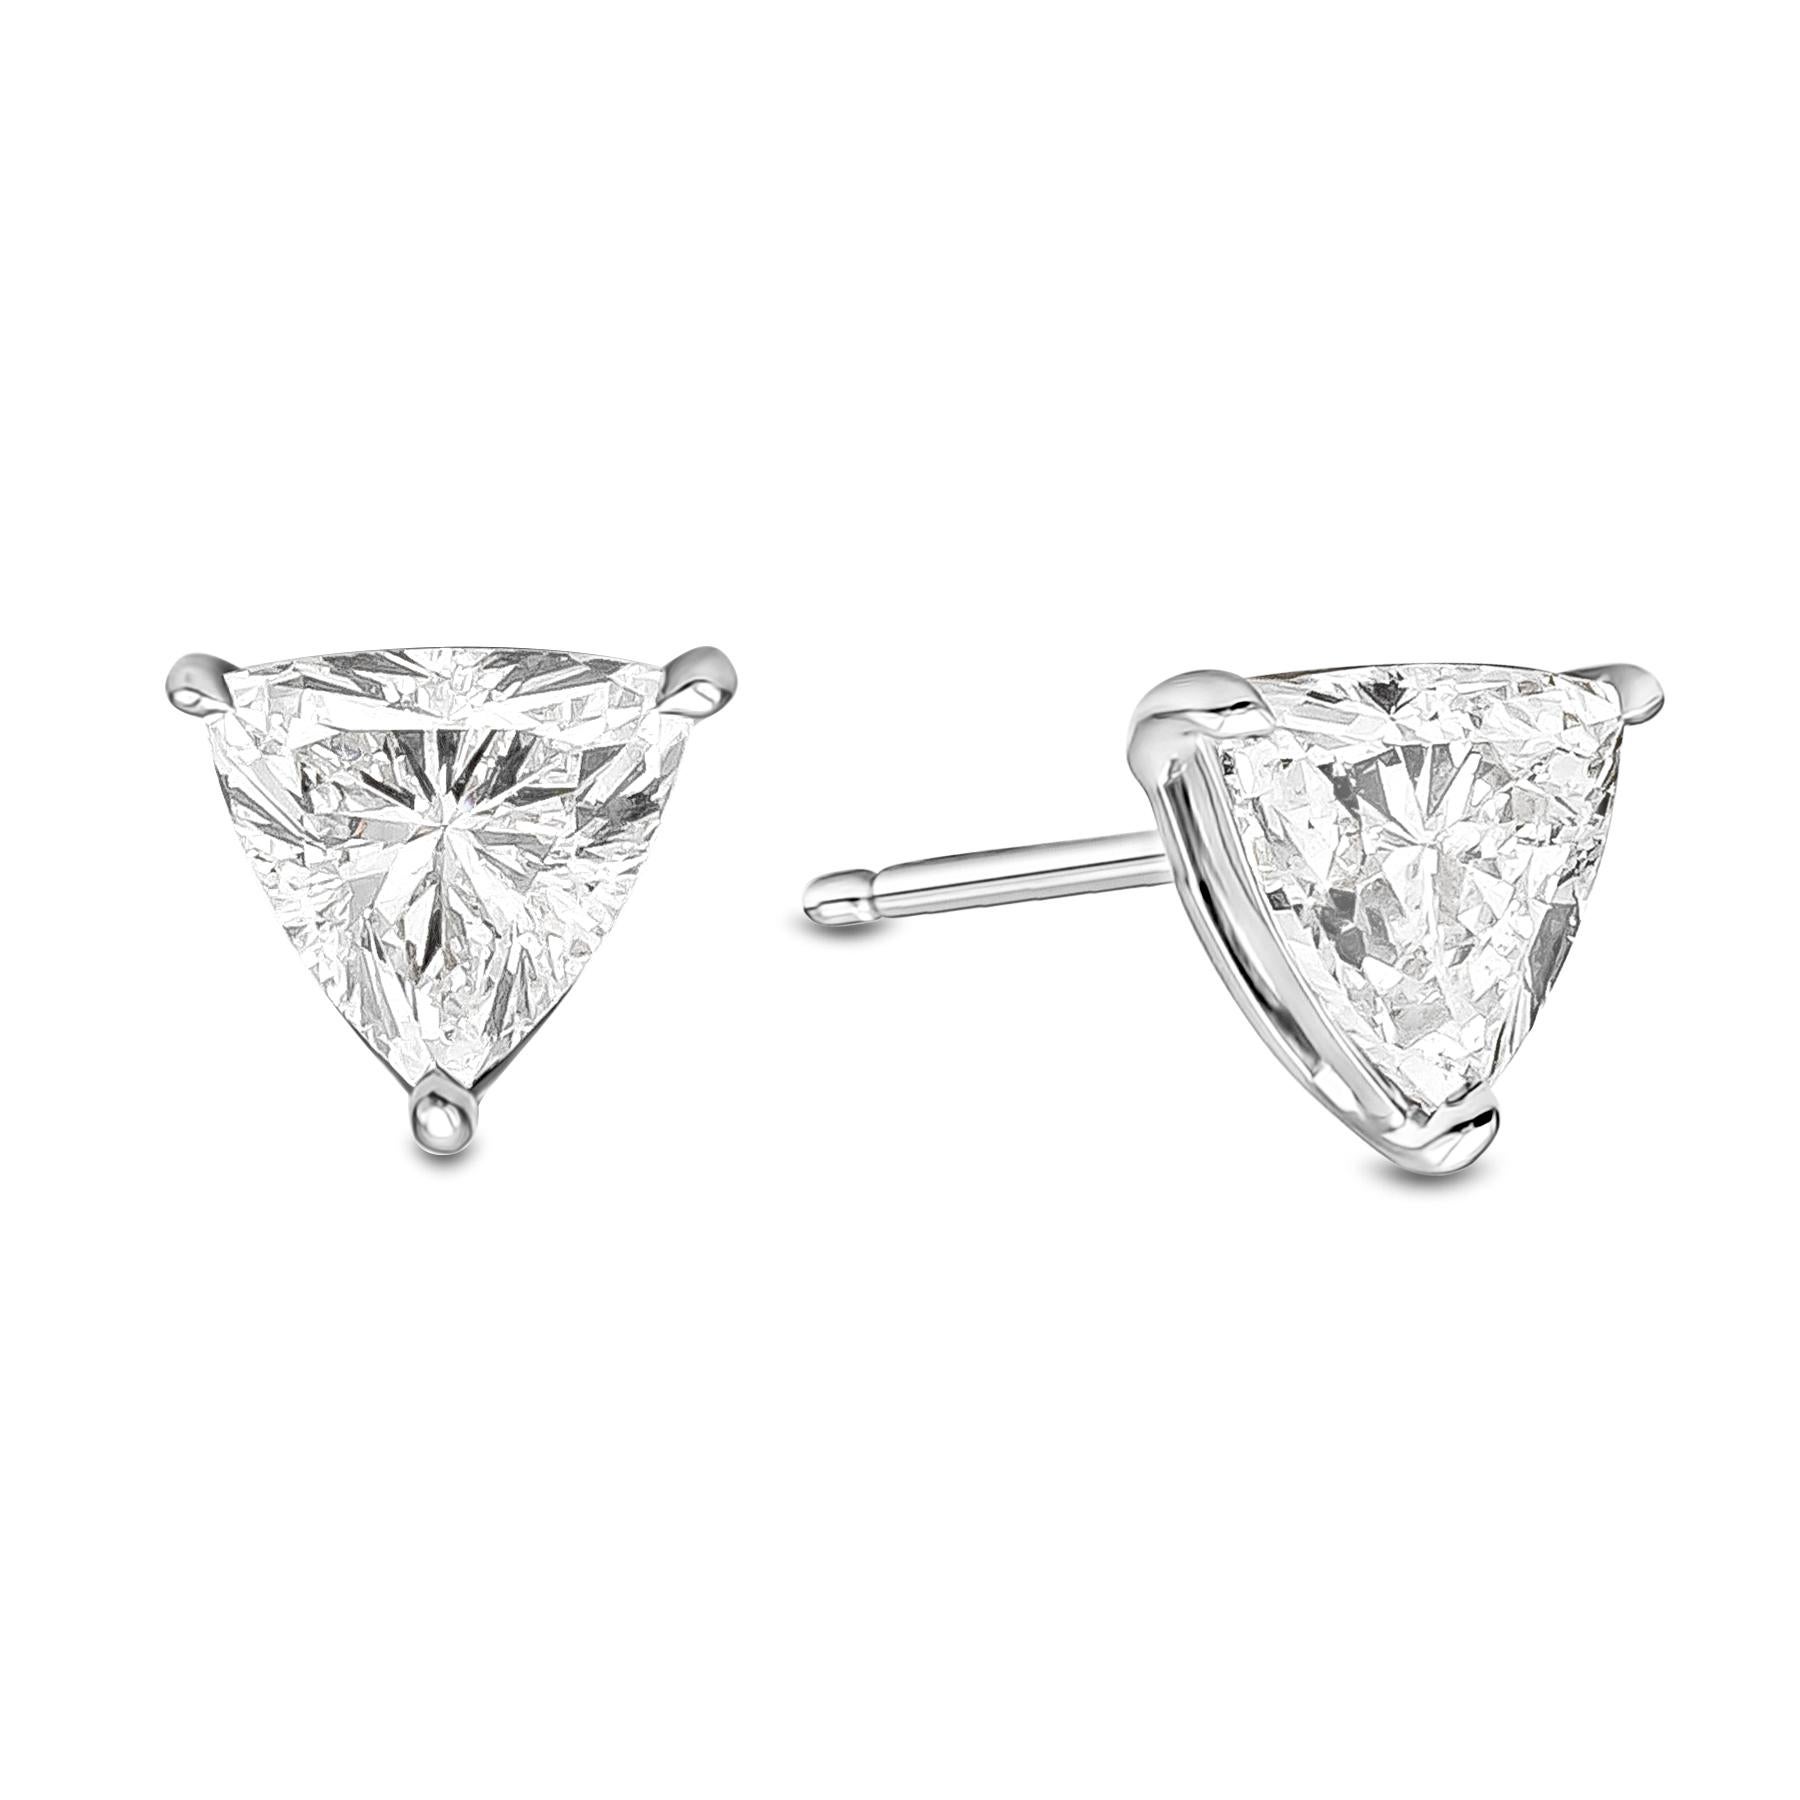 A pair of charming stud earrings, featuring 2.34 carats of trillion cut diamonds certified by GIA as E-F color and SI2 clarity. Perfectly crafted in three prong baskets setting made of 18K white gold.

Roman Malakov is a custom house, specializing